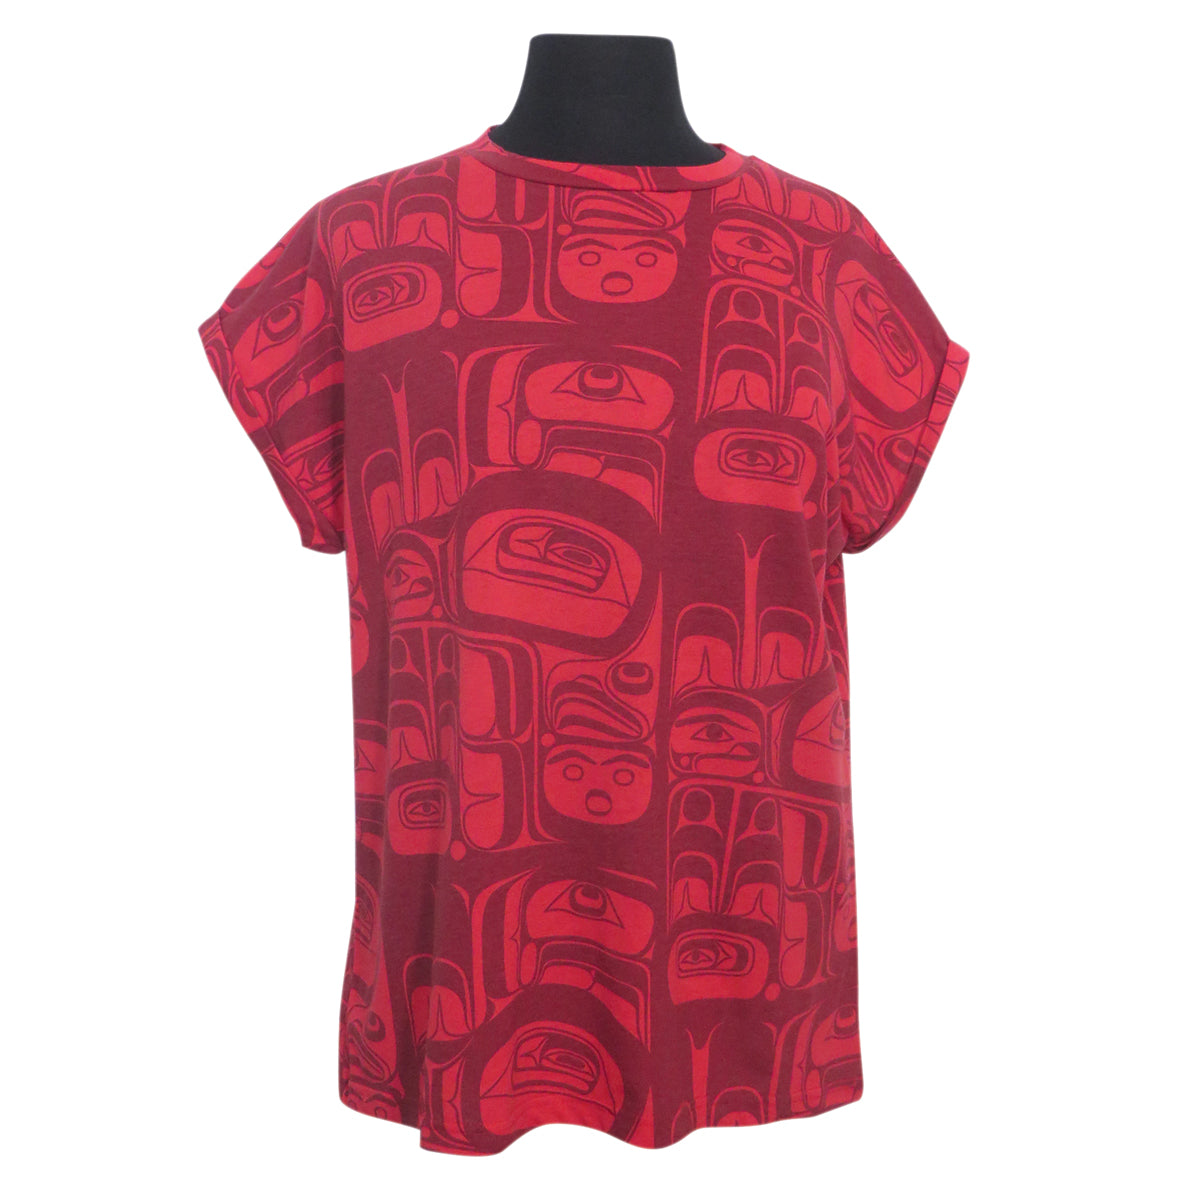 T Shirt Allen Weir Loose Fit Eagle Vision and Feathers - Red / XXL - TWLF13XXL - House of Himwitsa Native Art Gallery and Gifts